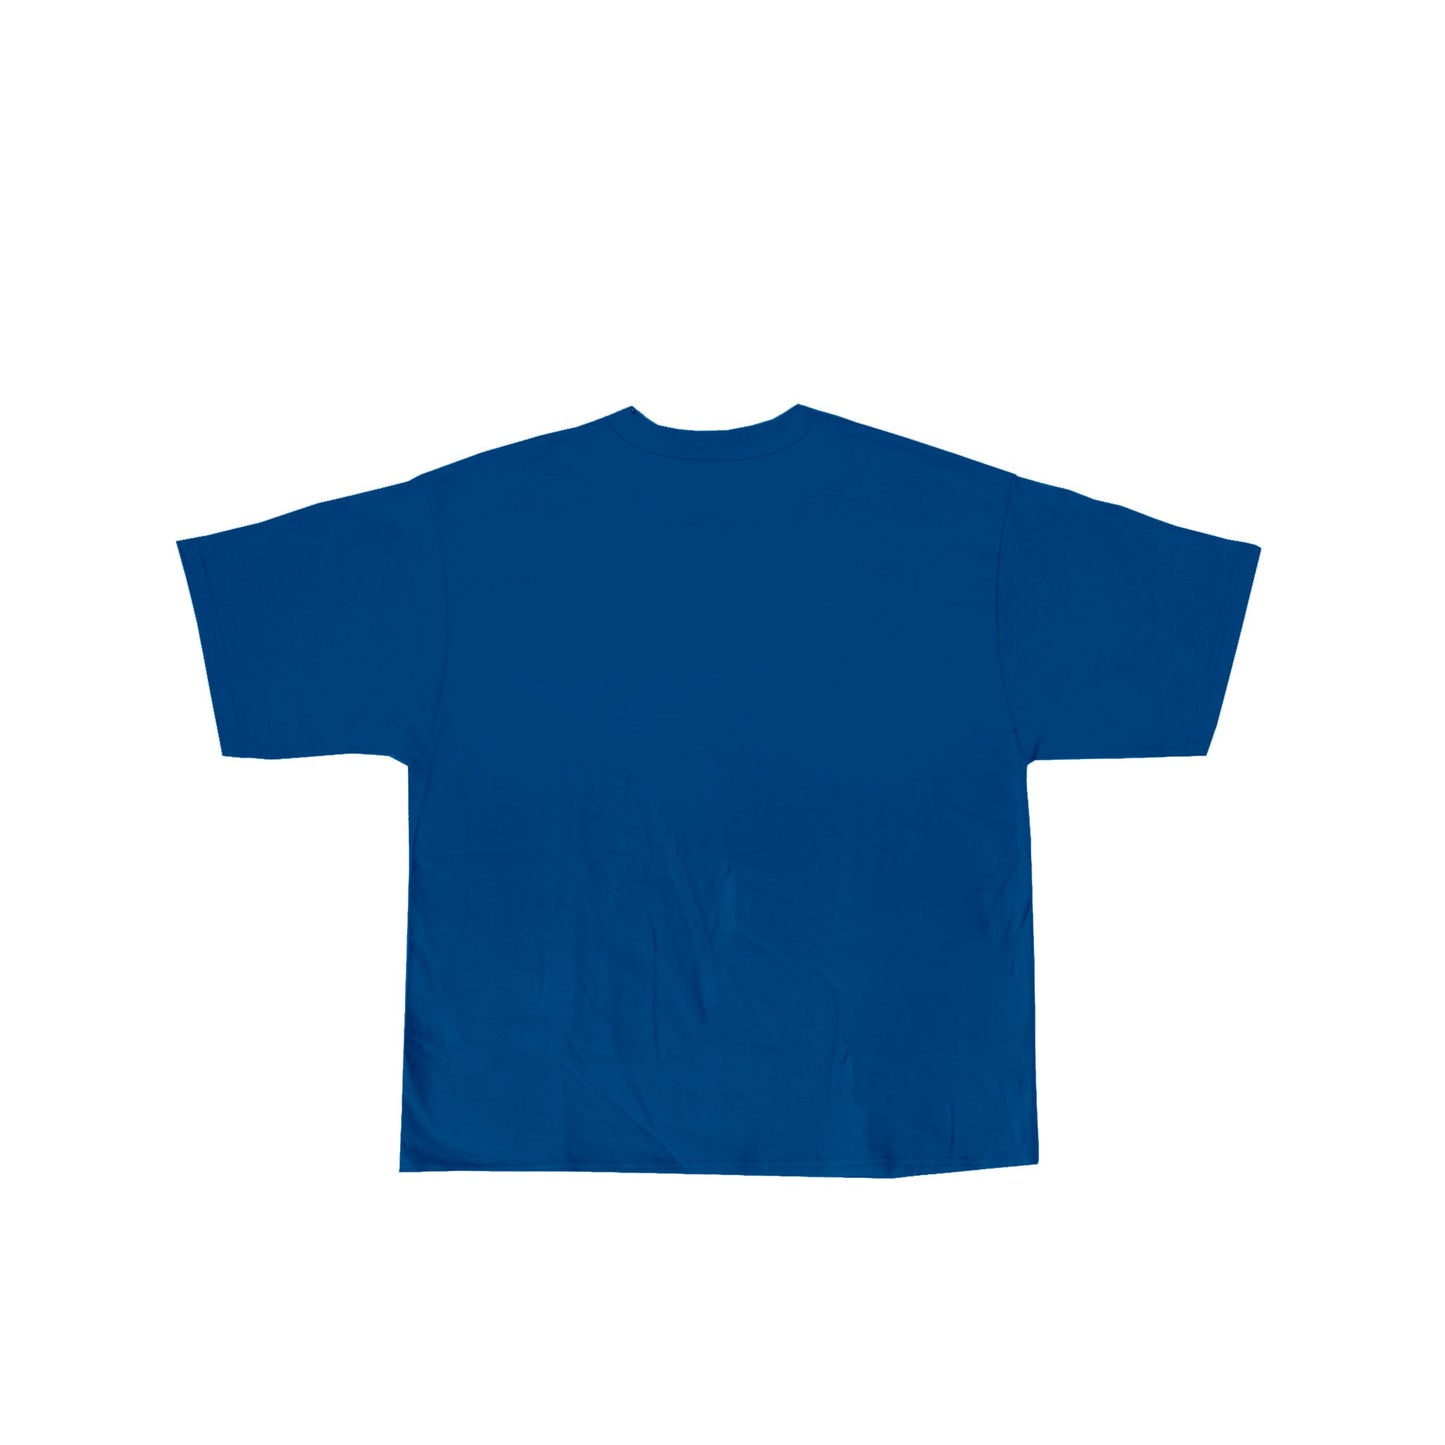 Focus On The Lord Blue T - Shirt - GiveGodPraiseClothing